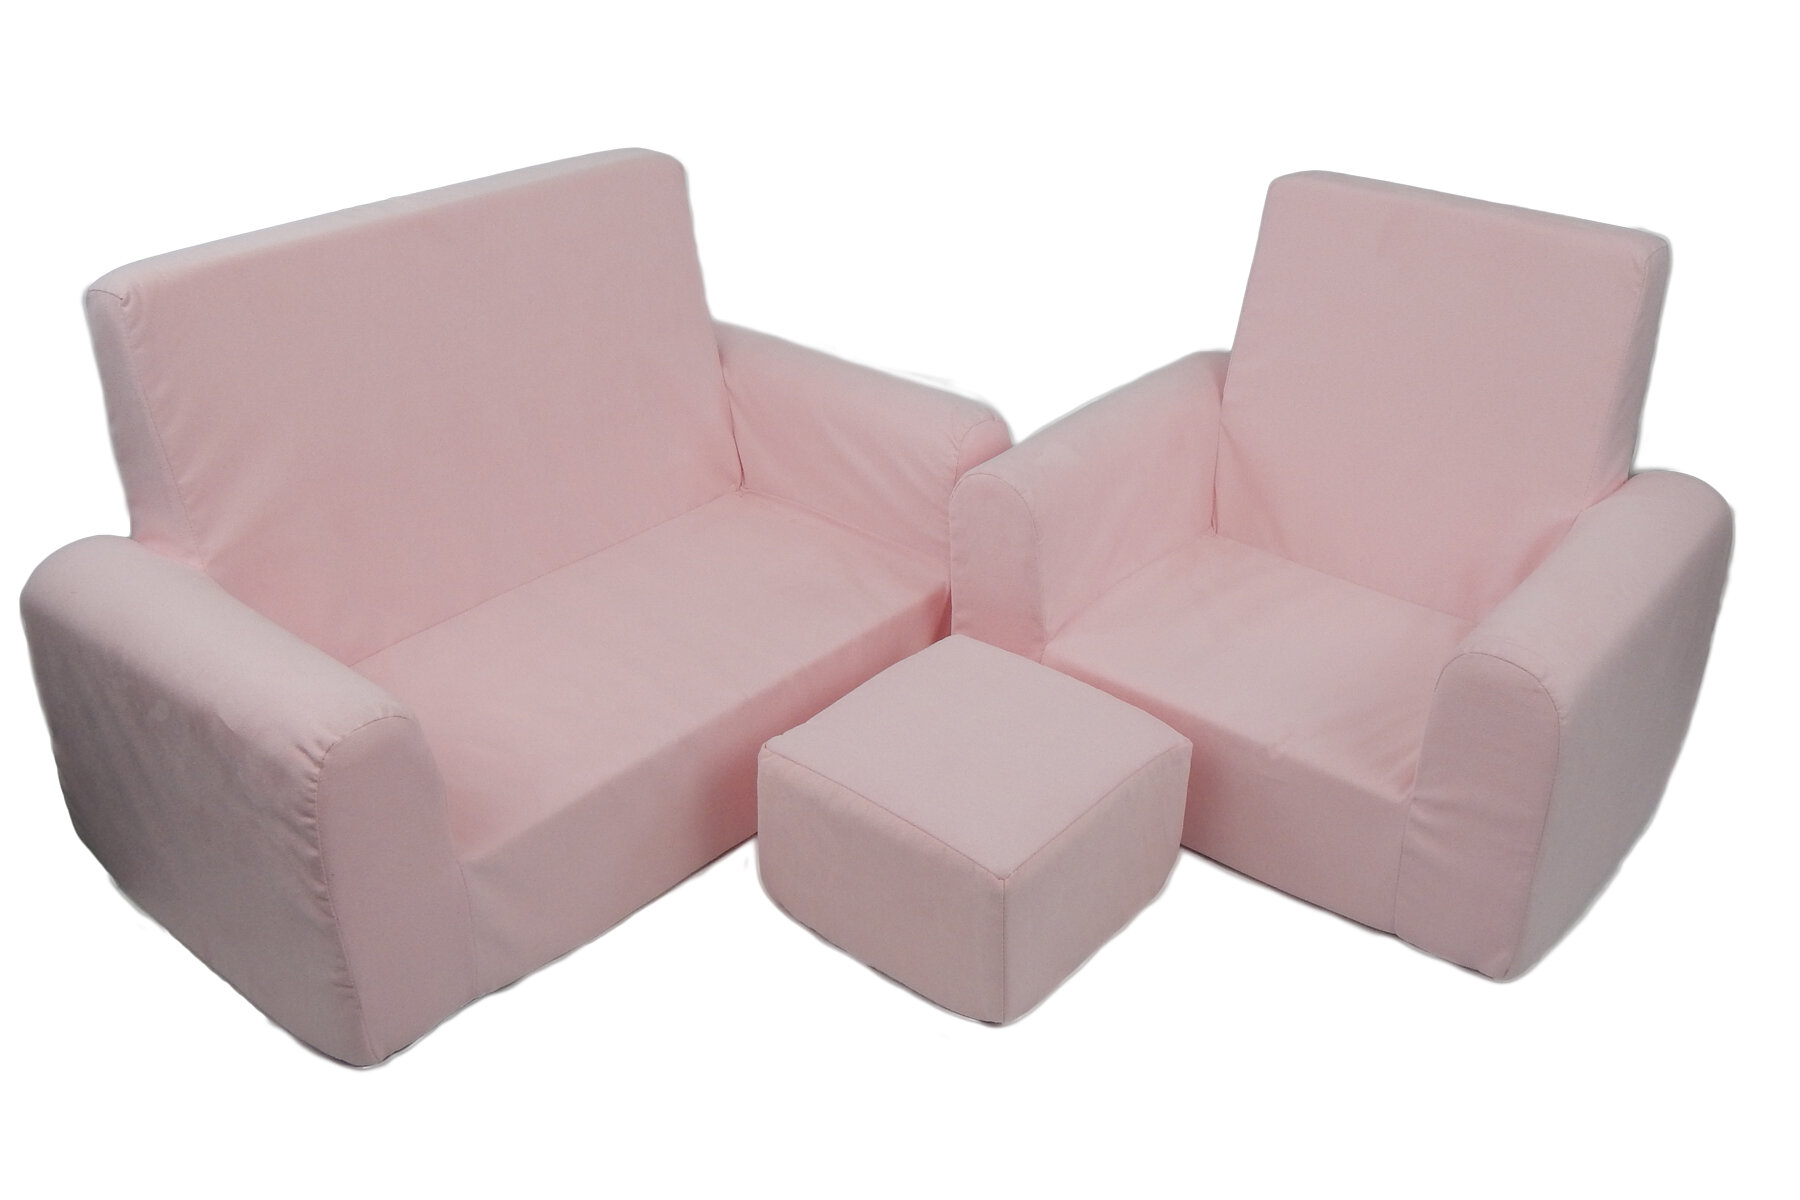 toddler sofa and chair sets